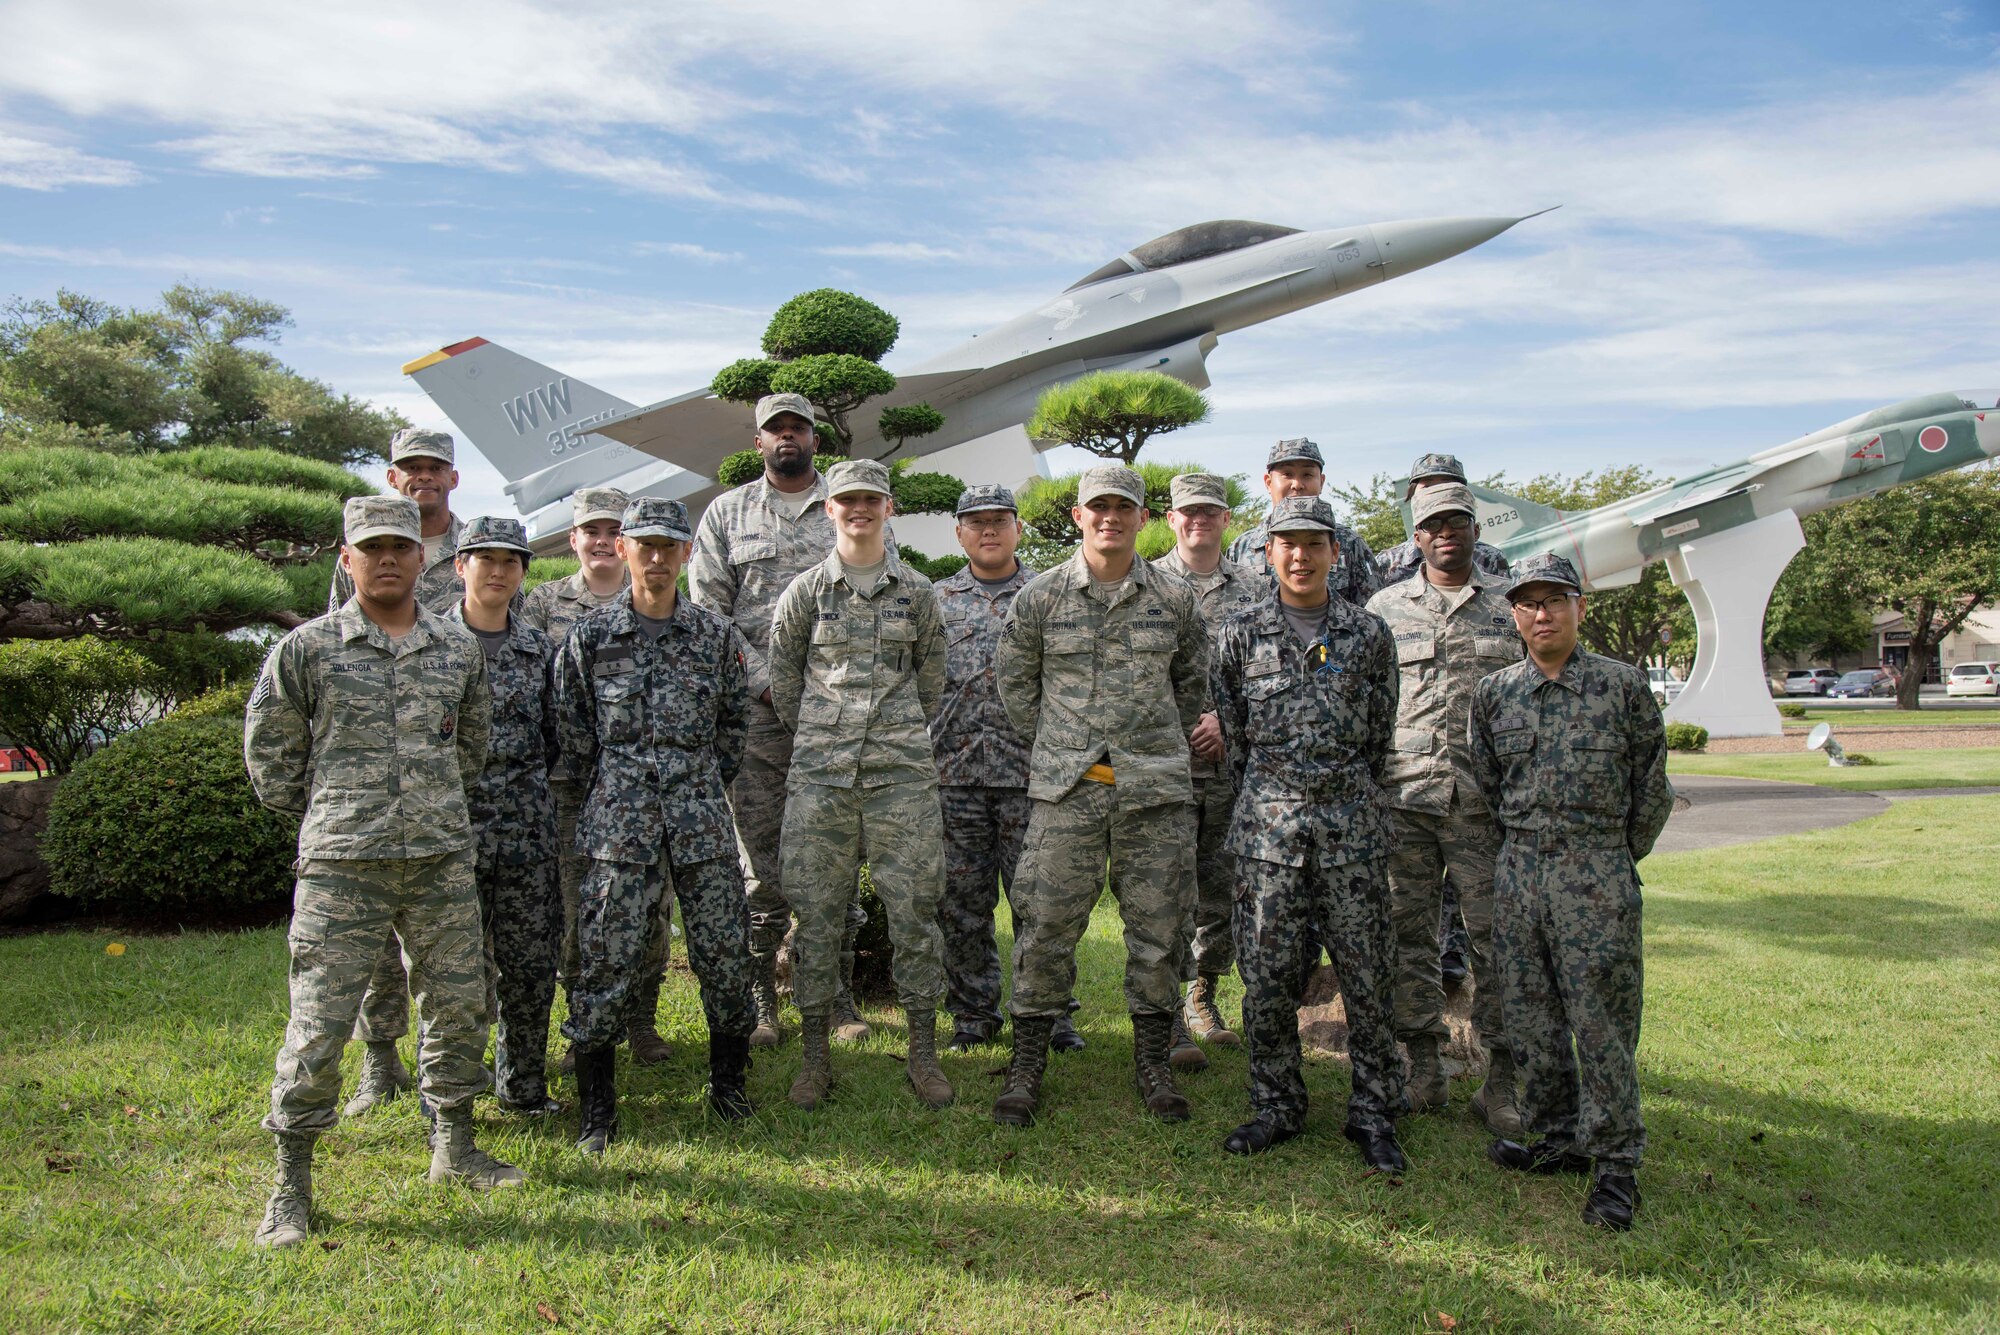 Japan Air Self-Defense Force and U.S. Air Force personnel stand united for a group photo during a Bilateral Exchange Program visit at Misawa Air Base, Japan, Sept. 18, 2018. The group split into pairs to learn the differences and similarities of each other’s careers over the course of 10 days. (U.S. Air Force photo by Senior Airman Sadie Colbert)